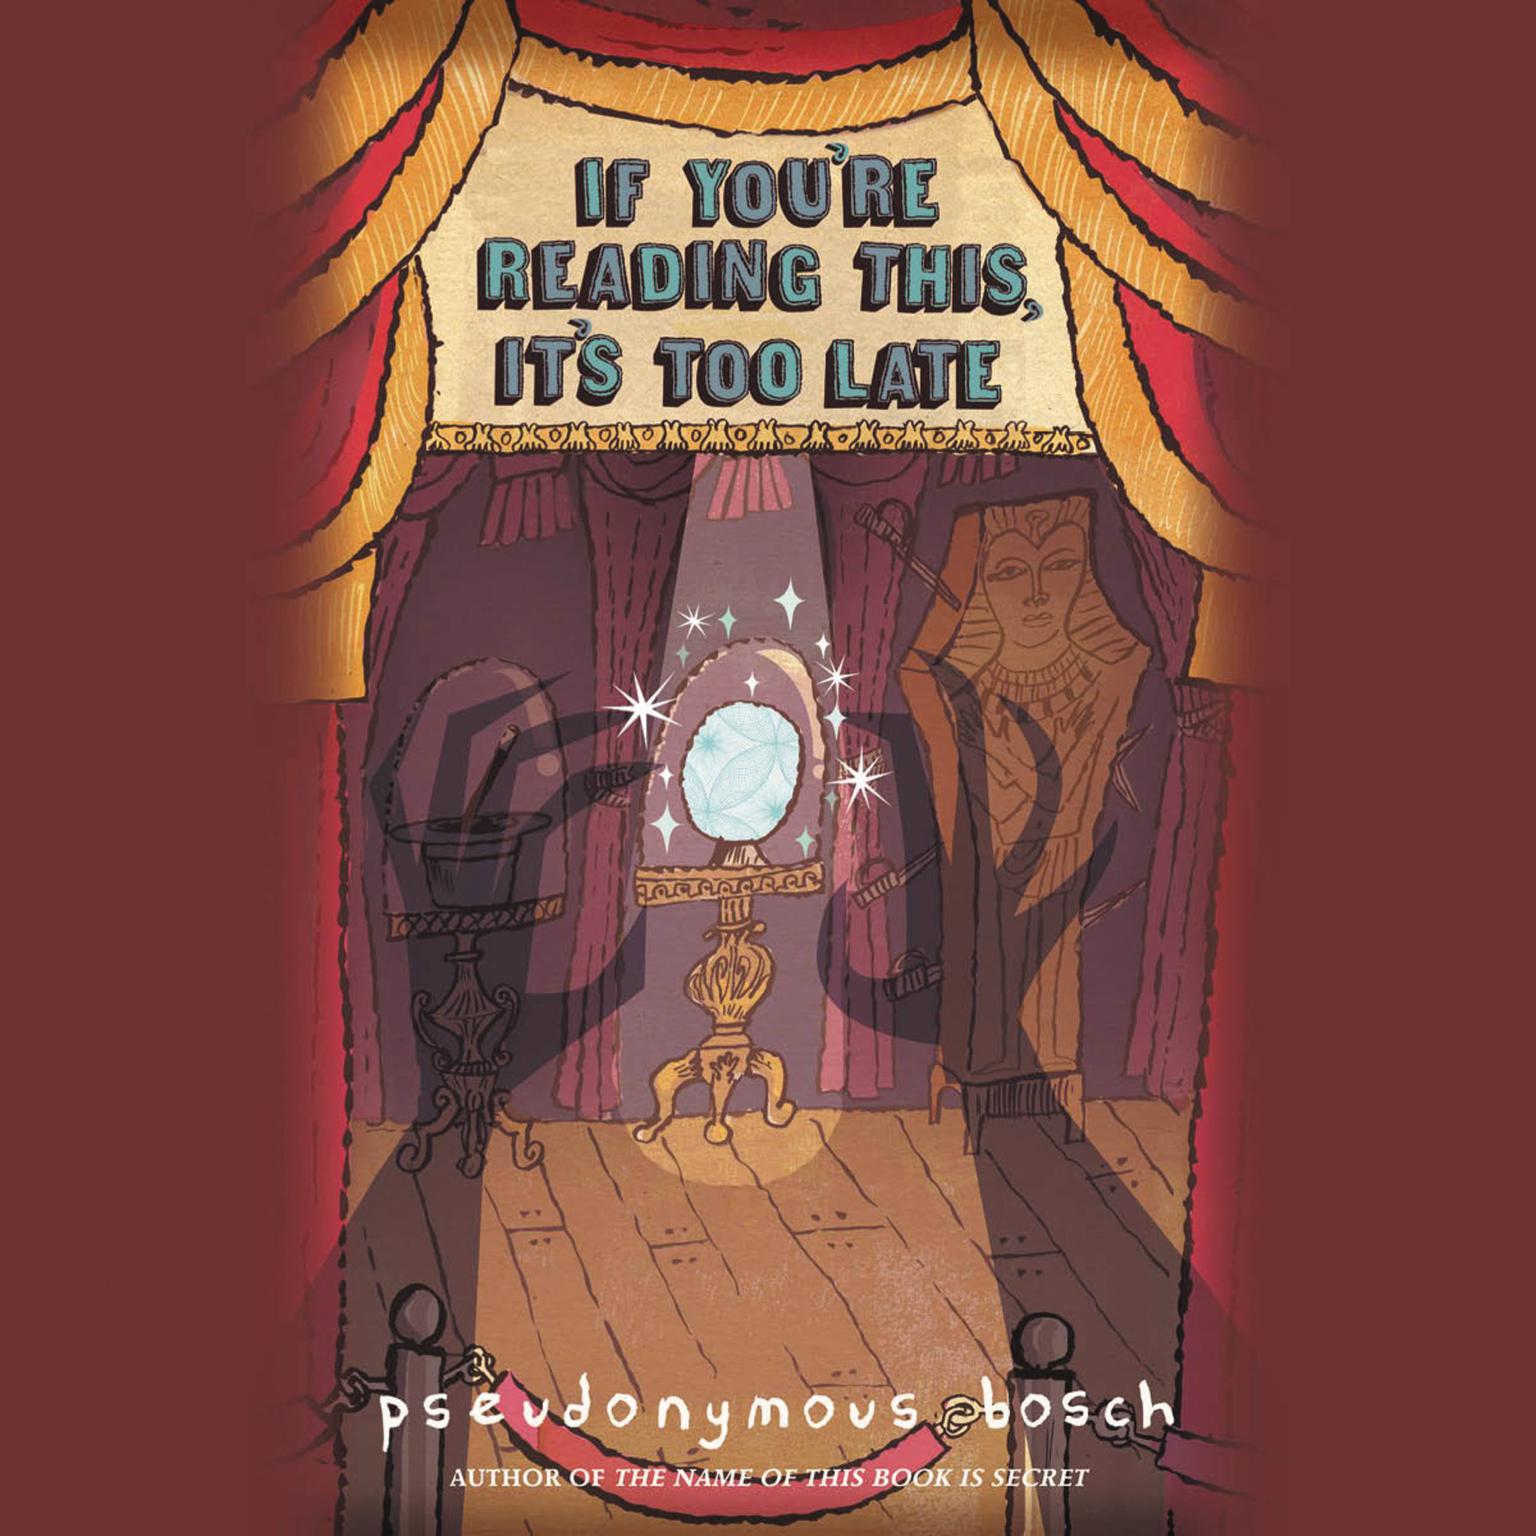 If Youre Reading This, Its Too Late Audiobook, by Pseudonymous Bosch